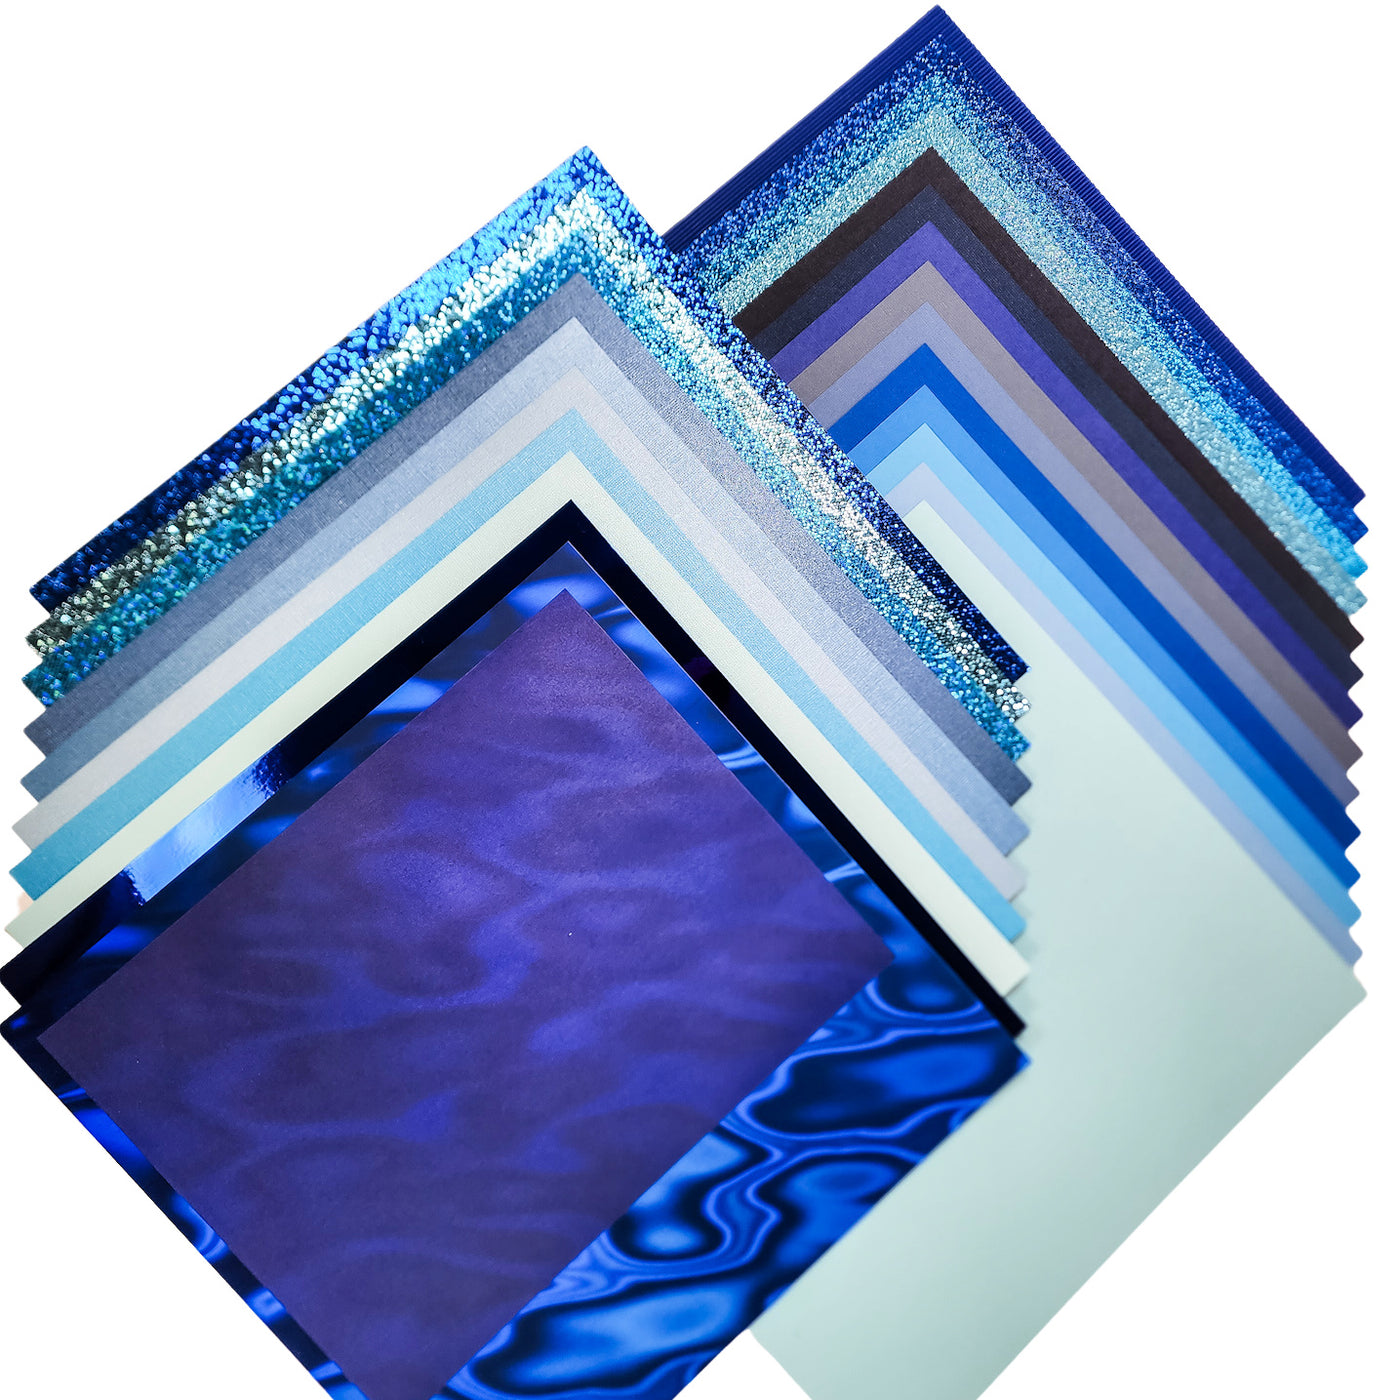 This variety pack includes 25 sheets of our most beautiful blue cardstock & specialty papers! Try textured cardstock, glitter cardstock, glimmer cardstock, mirror cardstock, and more. 